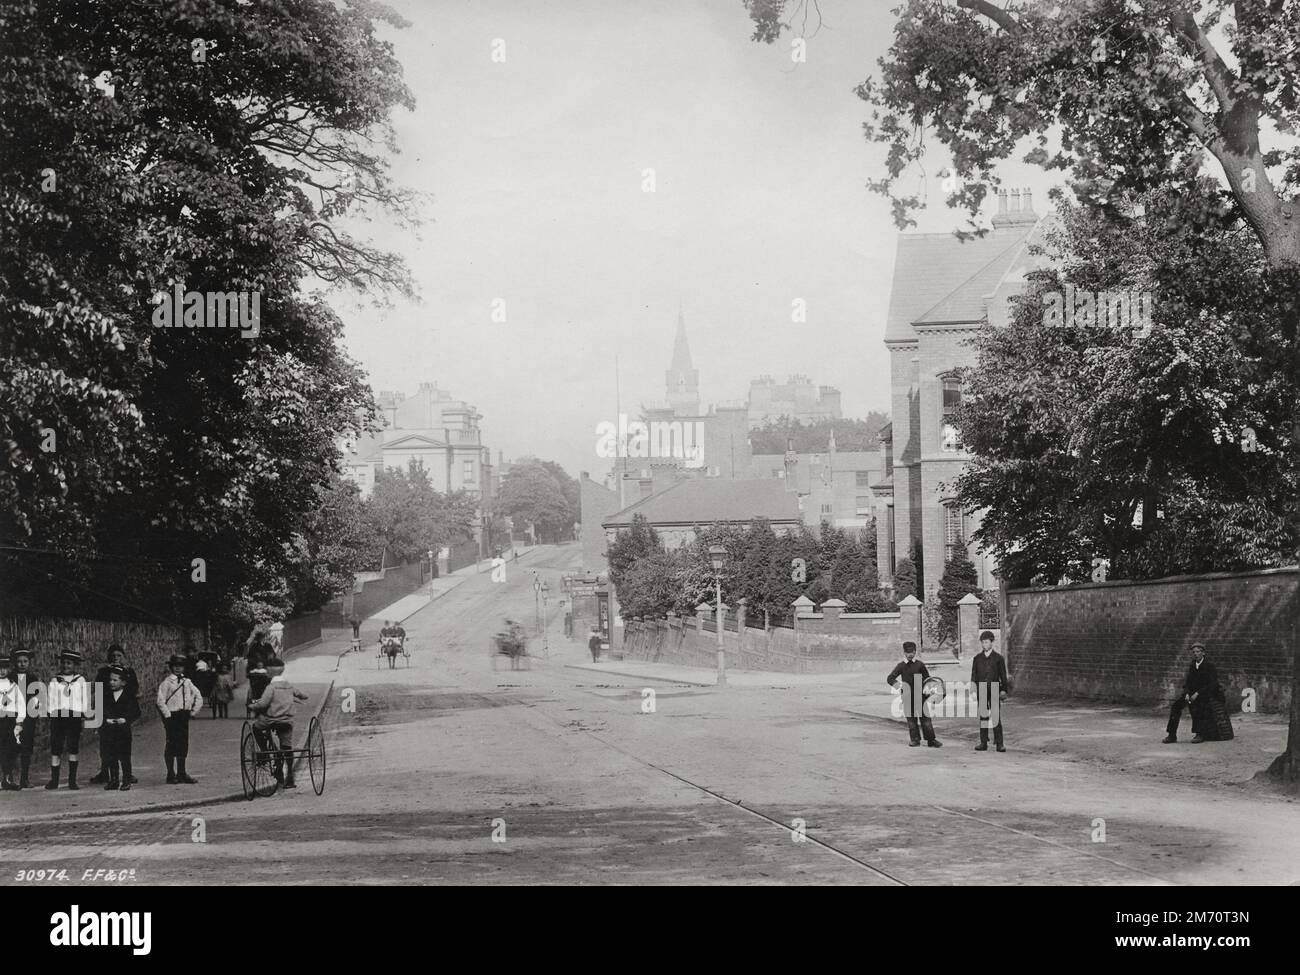 Vintage late 19th/early 20th century photograph: 1892 - Tricycle on Warwick Street, Leamington Spa, Warwickshire Stock Photo